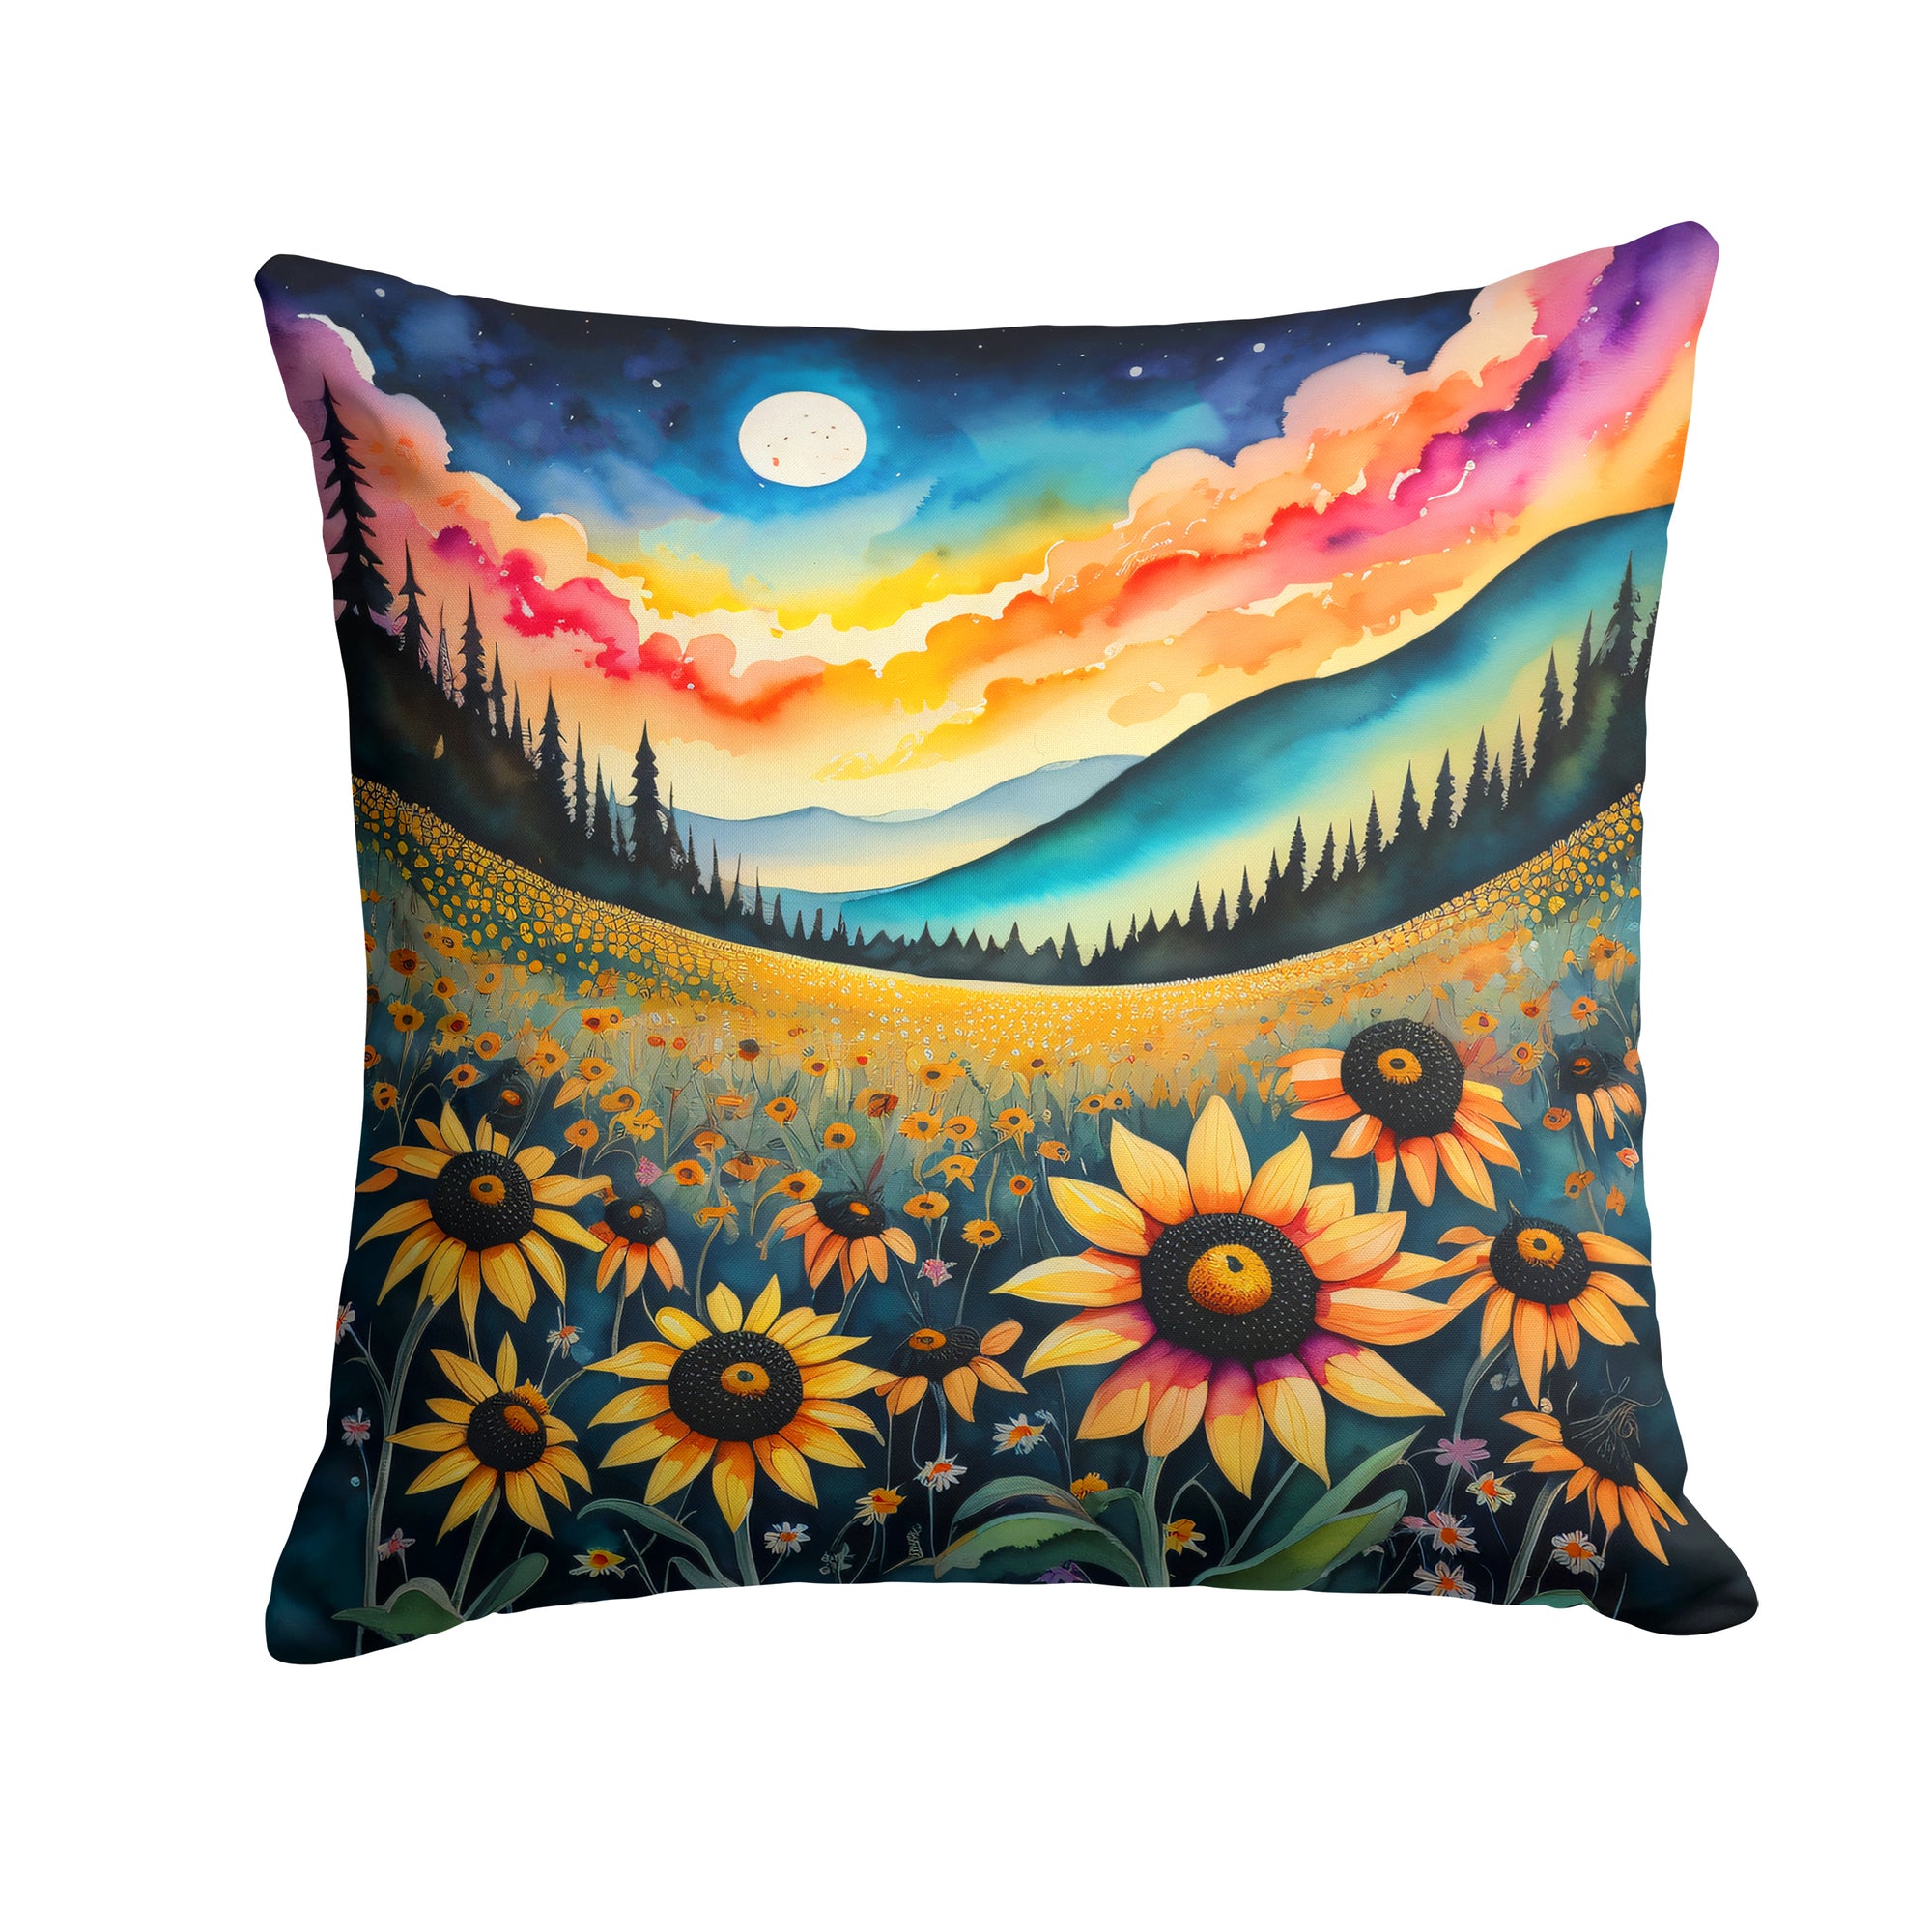 Buy this Colorful Black-eyed Susans Fabric Decorative Pillow